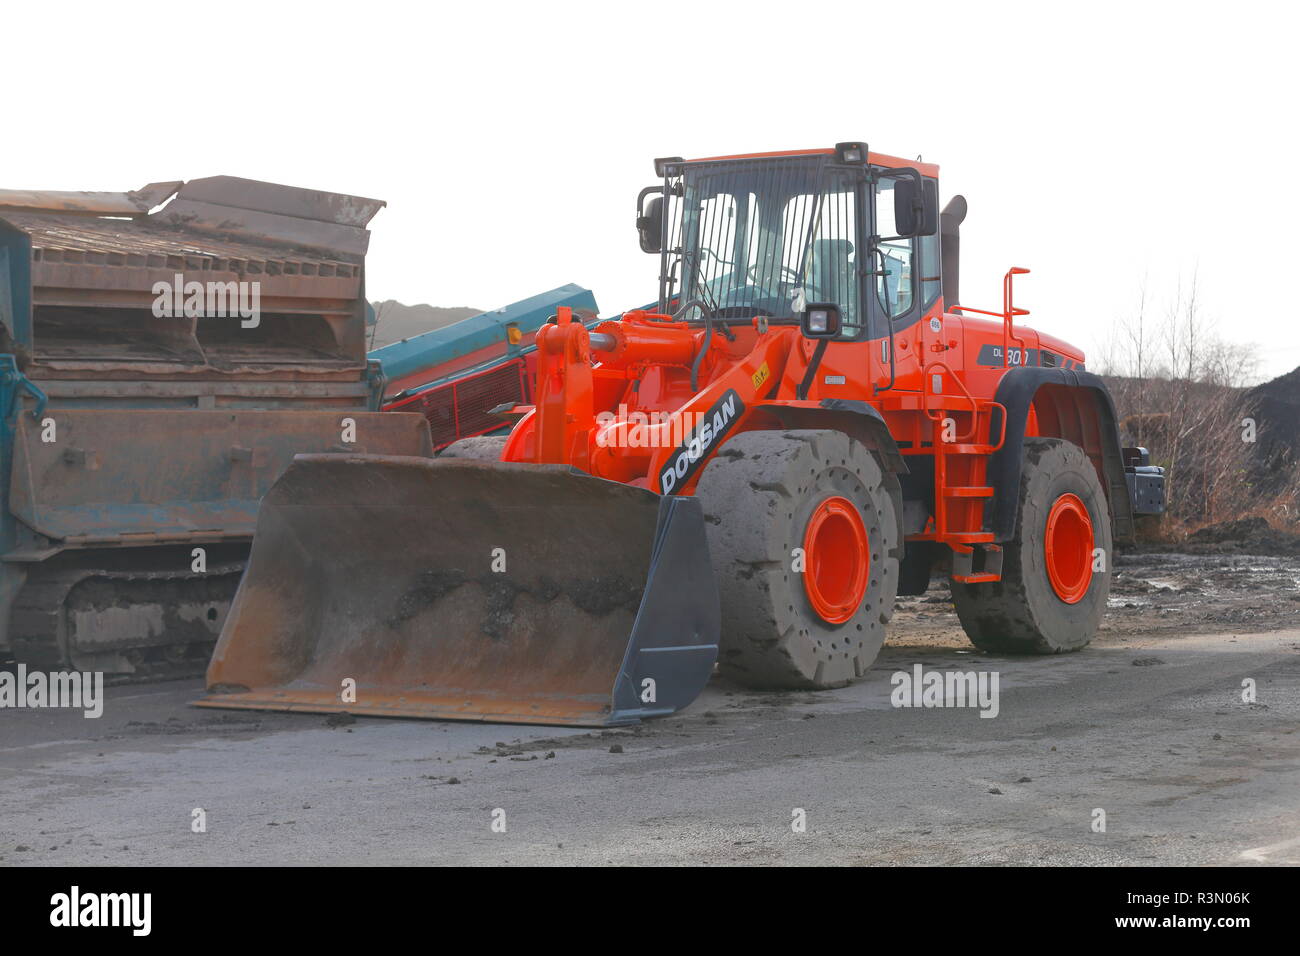 A Doosan DL300 wheeled loader on the demolition of Recycoal, Coal Recycling Plant in Rossington,Doncaster. Stock Photo